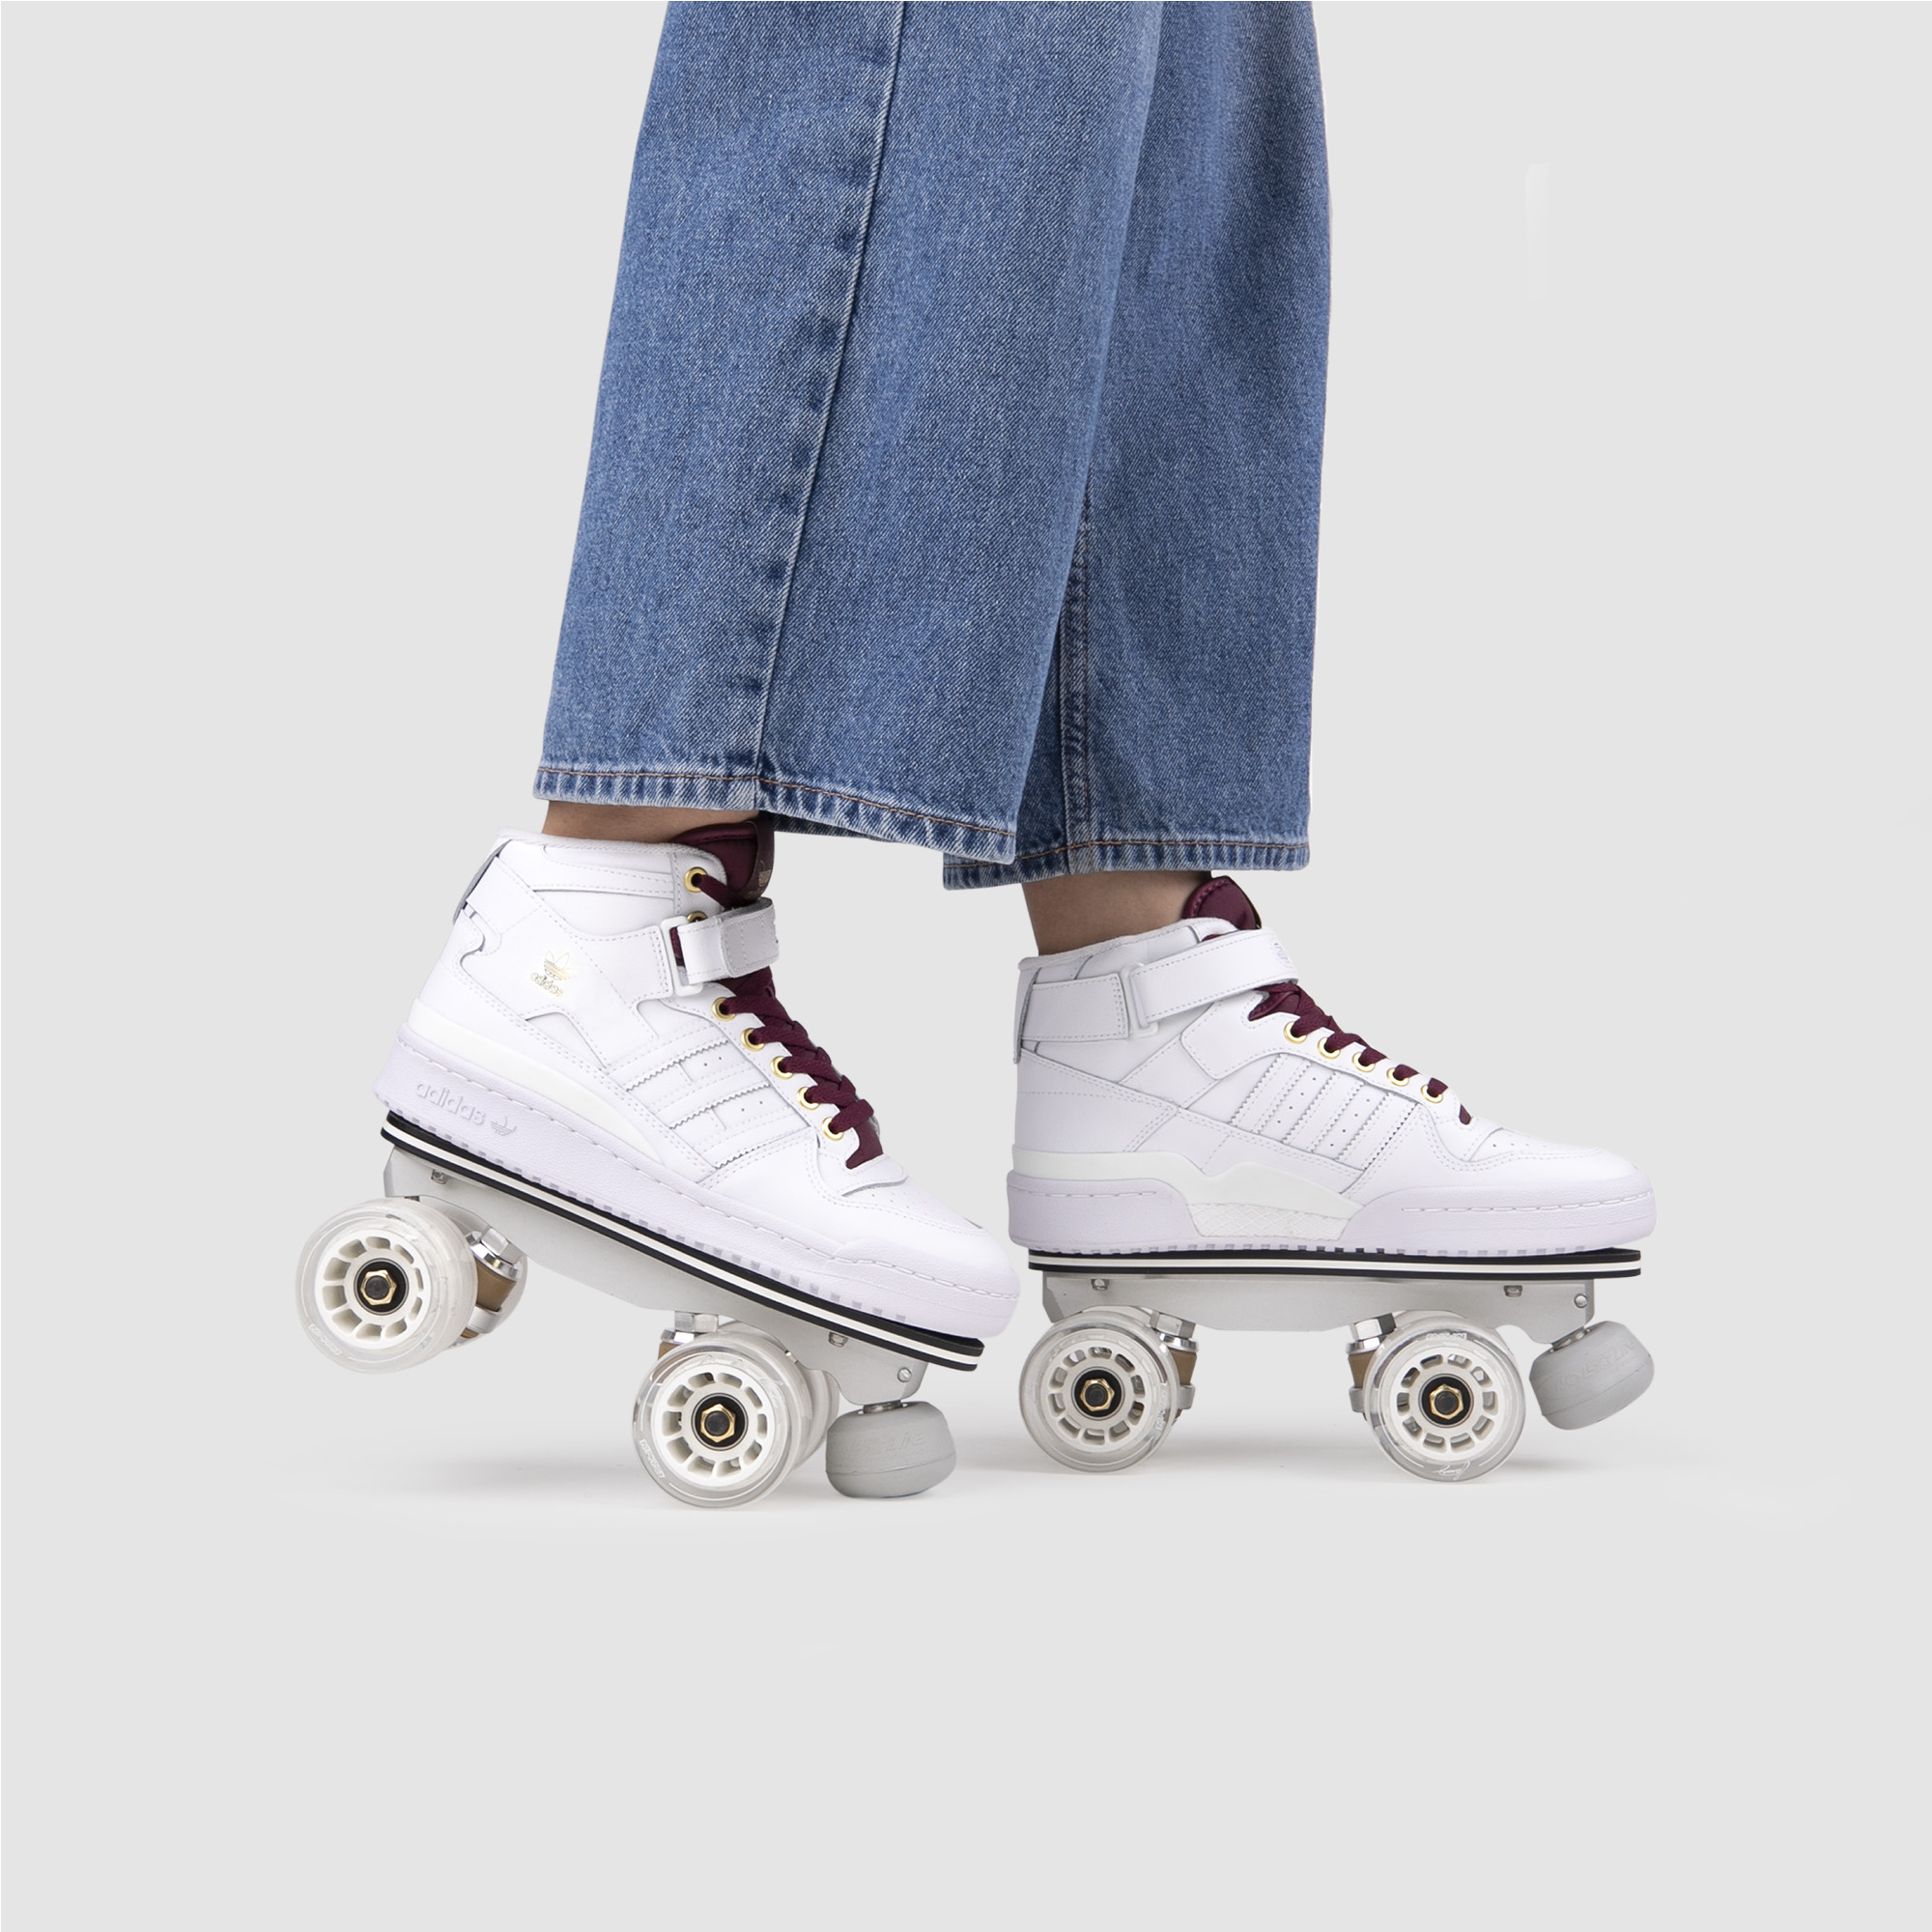 Introducir 76+ imagen roller skates that you attach to your shoes